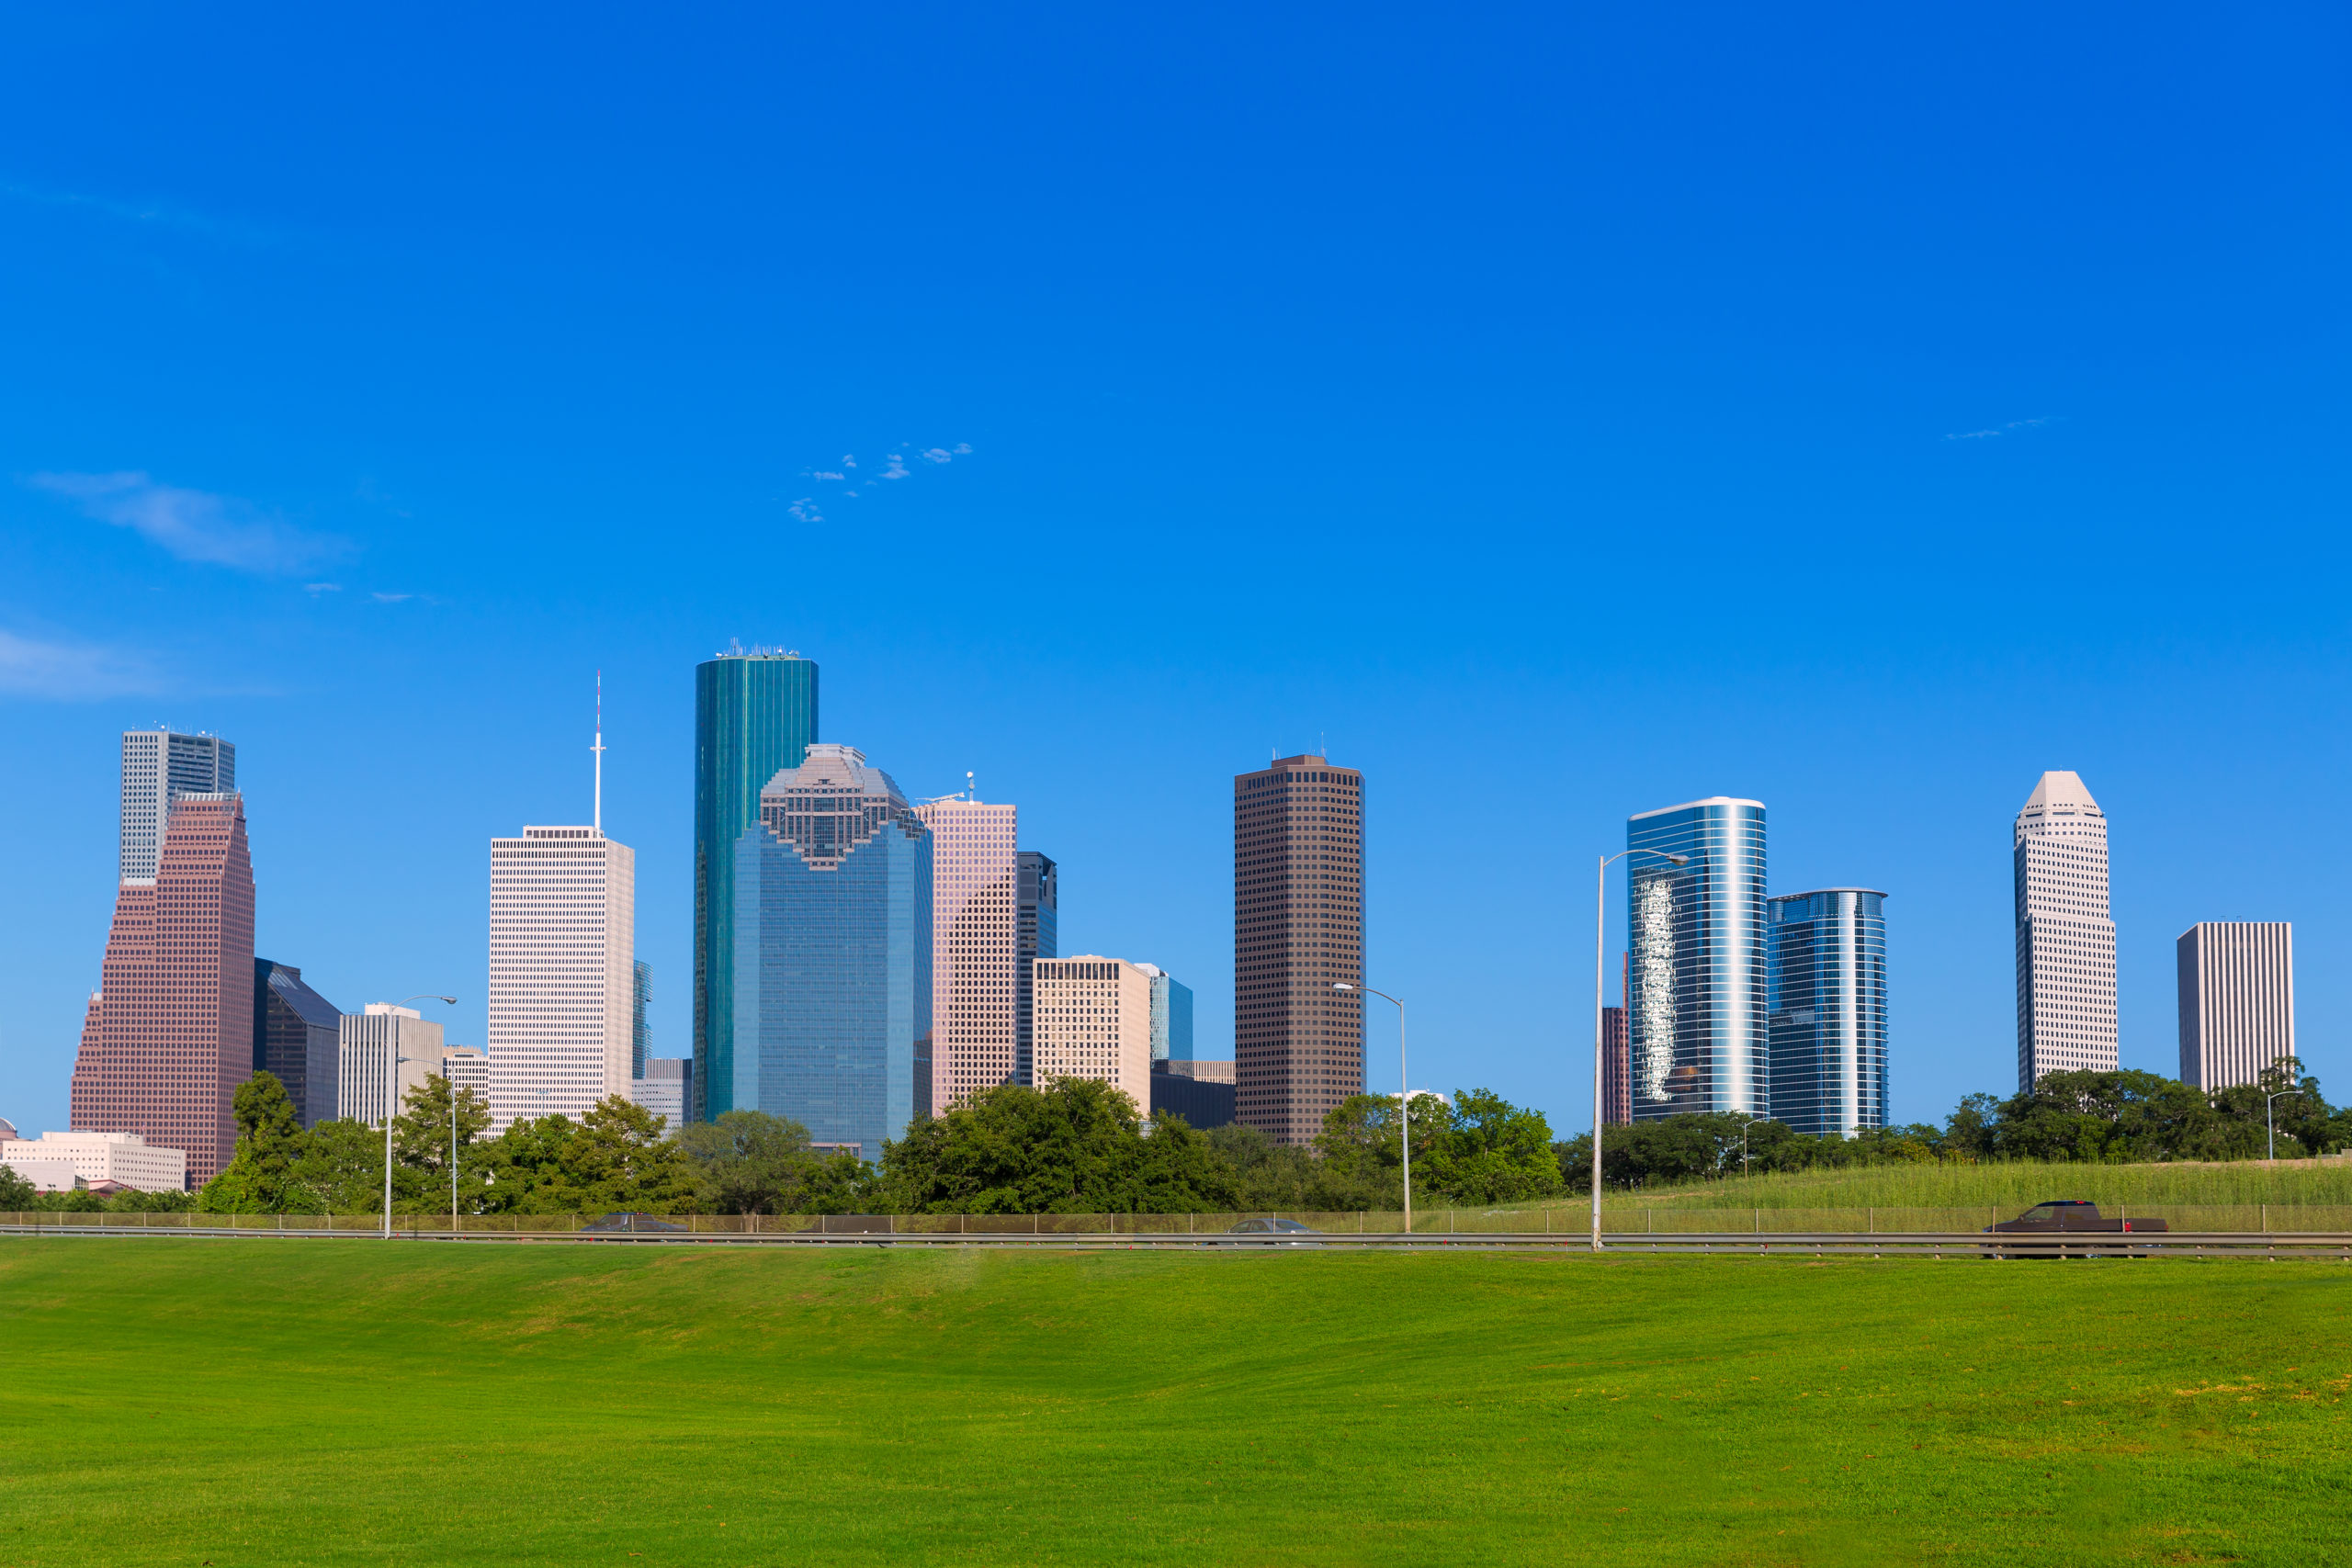 Morrissey Goodale’s Texas and Southern States M&A, Strategy and Innovation Symposium